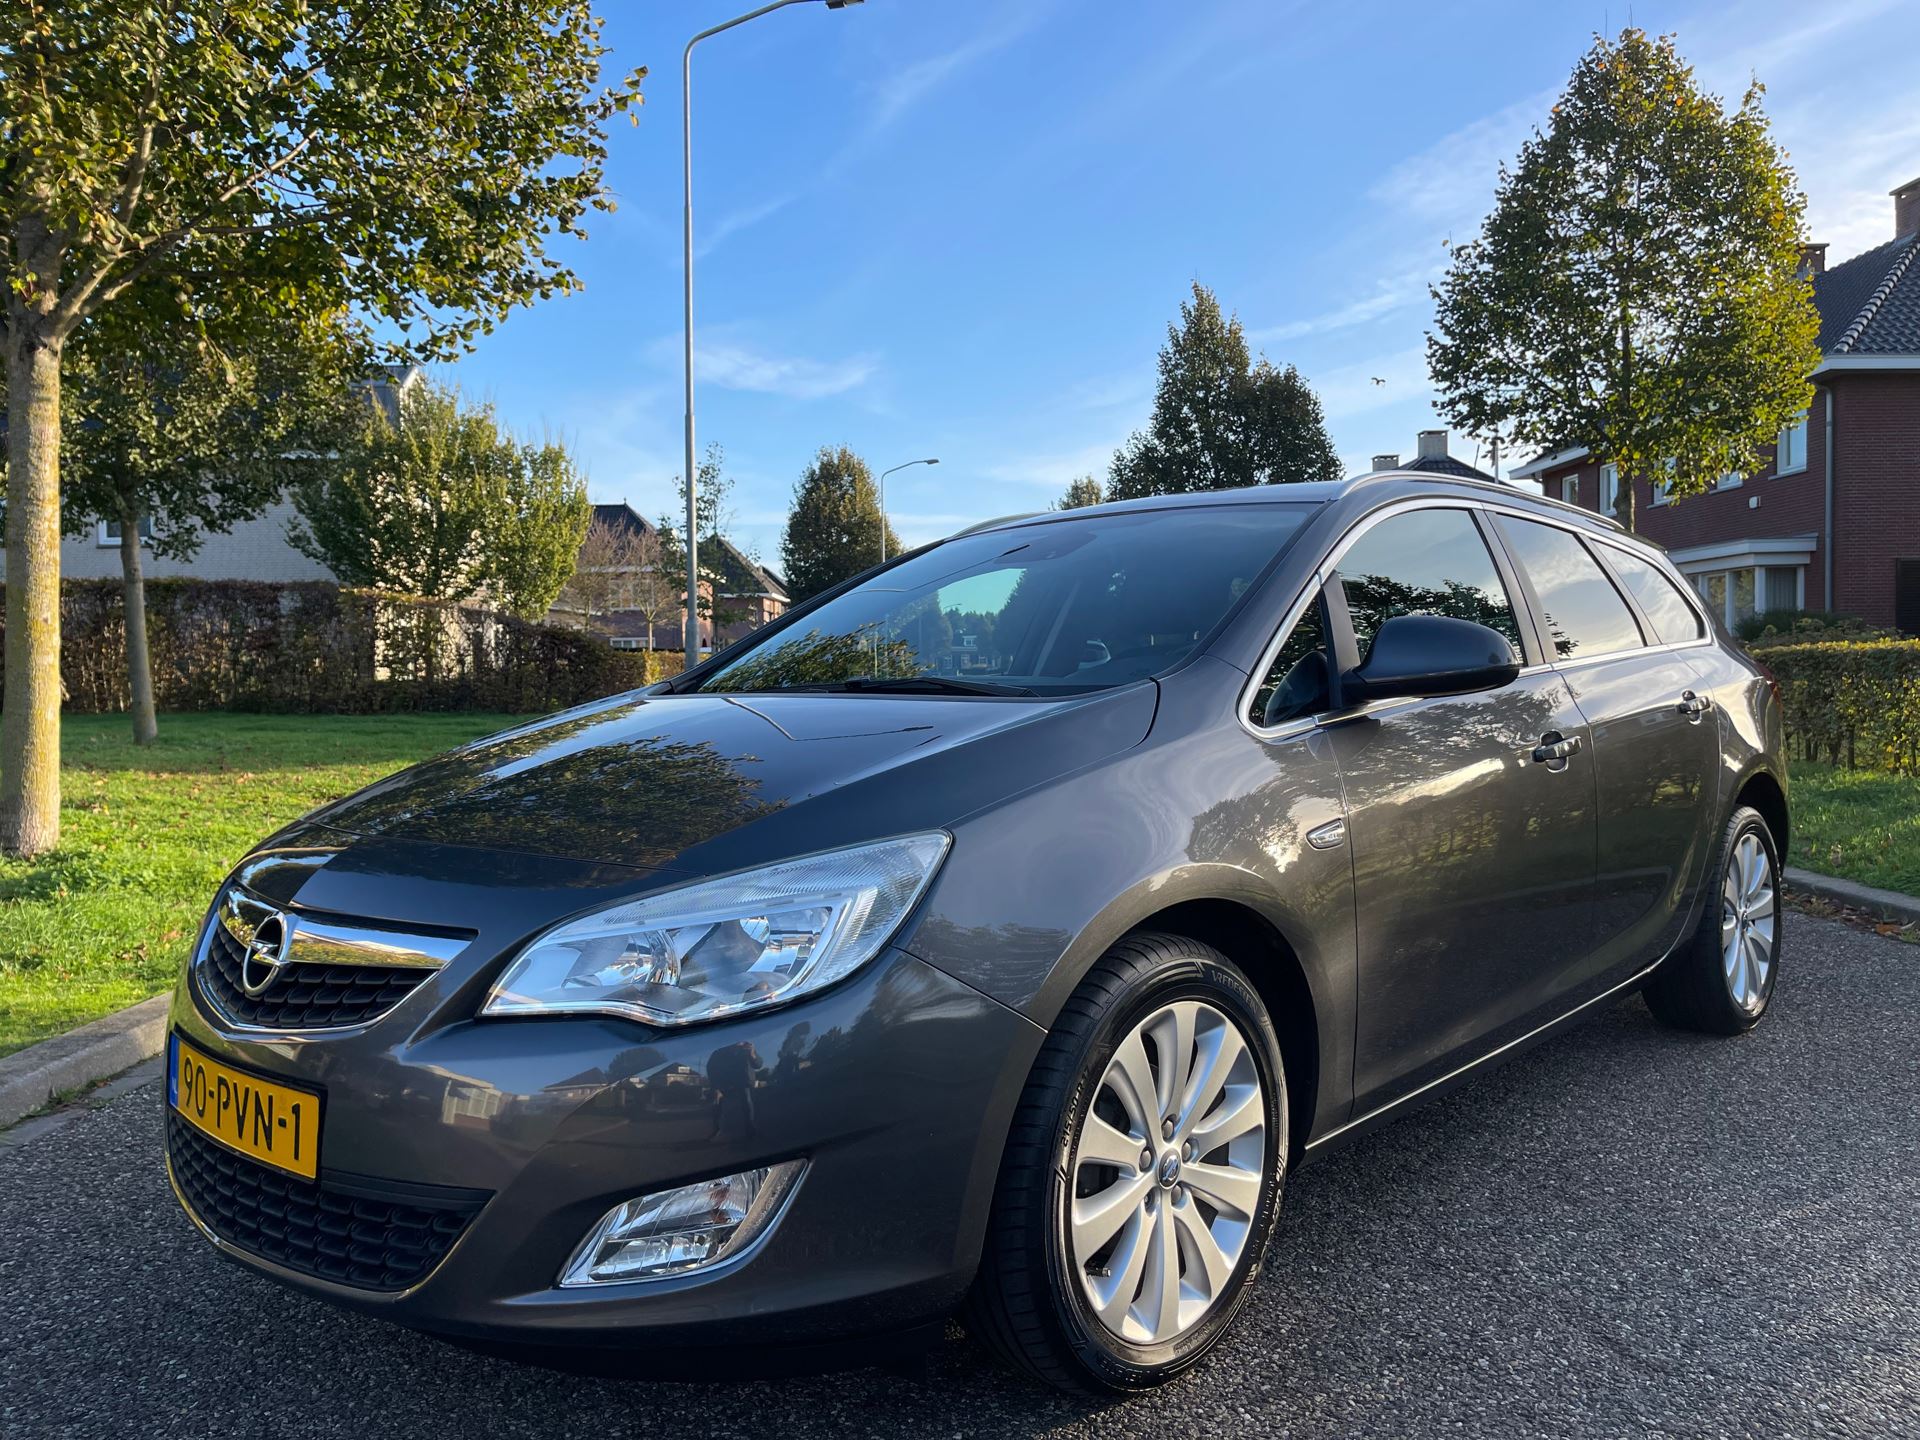 Opel Astra Sports Tourer occasion - Stevan auto's